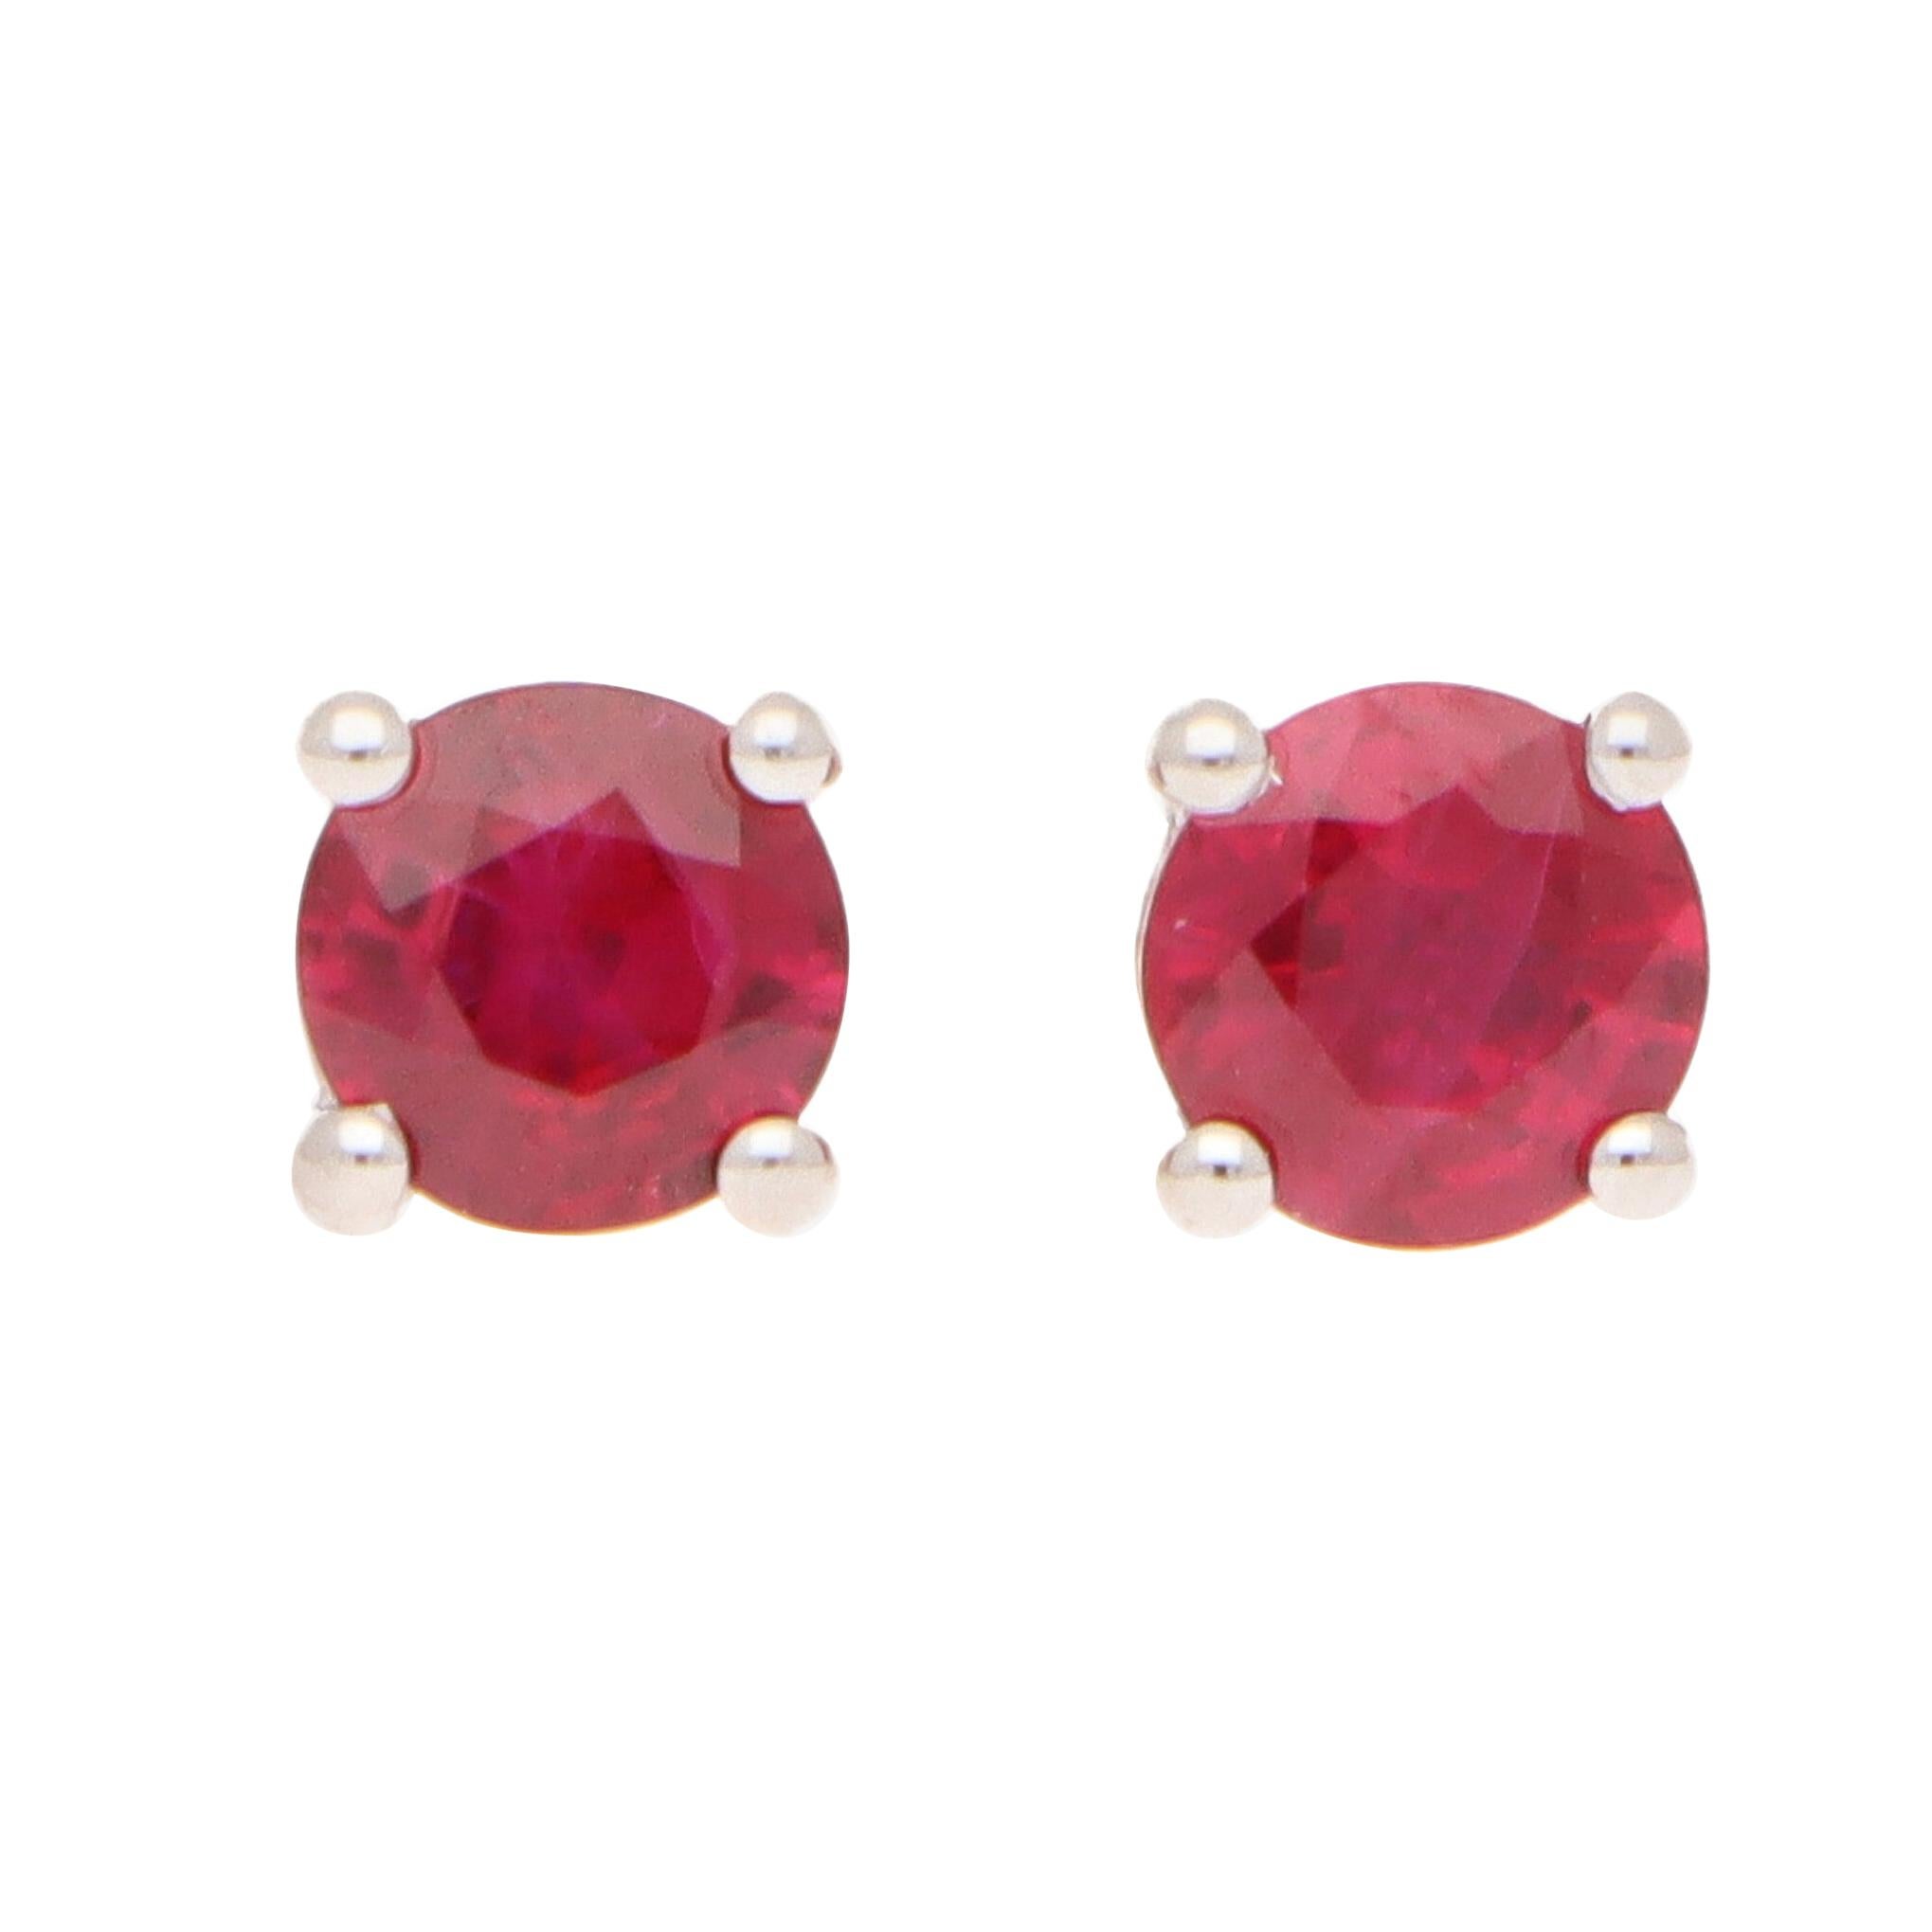 Round Cut 0.59ct Red Ruby Stud Earrings Set in 18k Yellow and White Gold